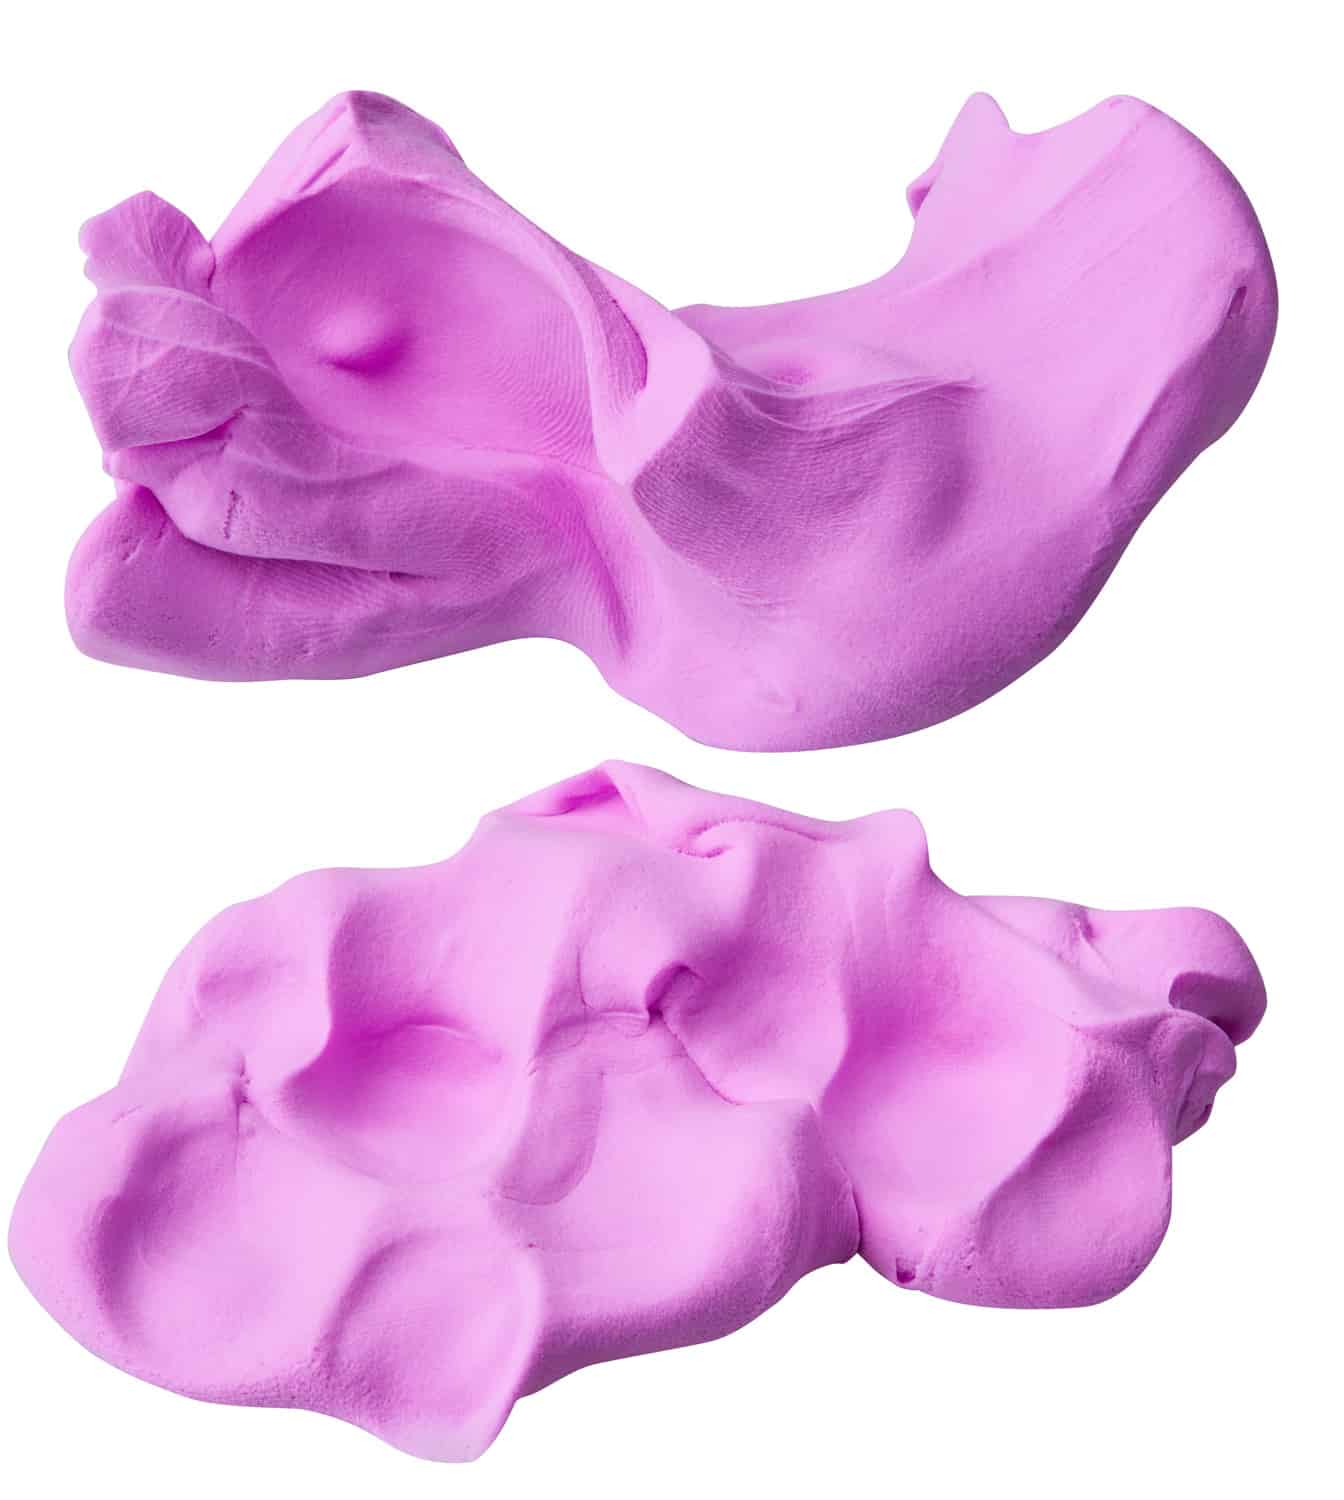 Vivid plasticine isolated on a white background. Plasticine dough or modeling clay is used for kids education and development